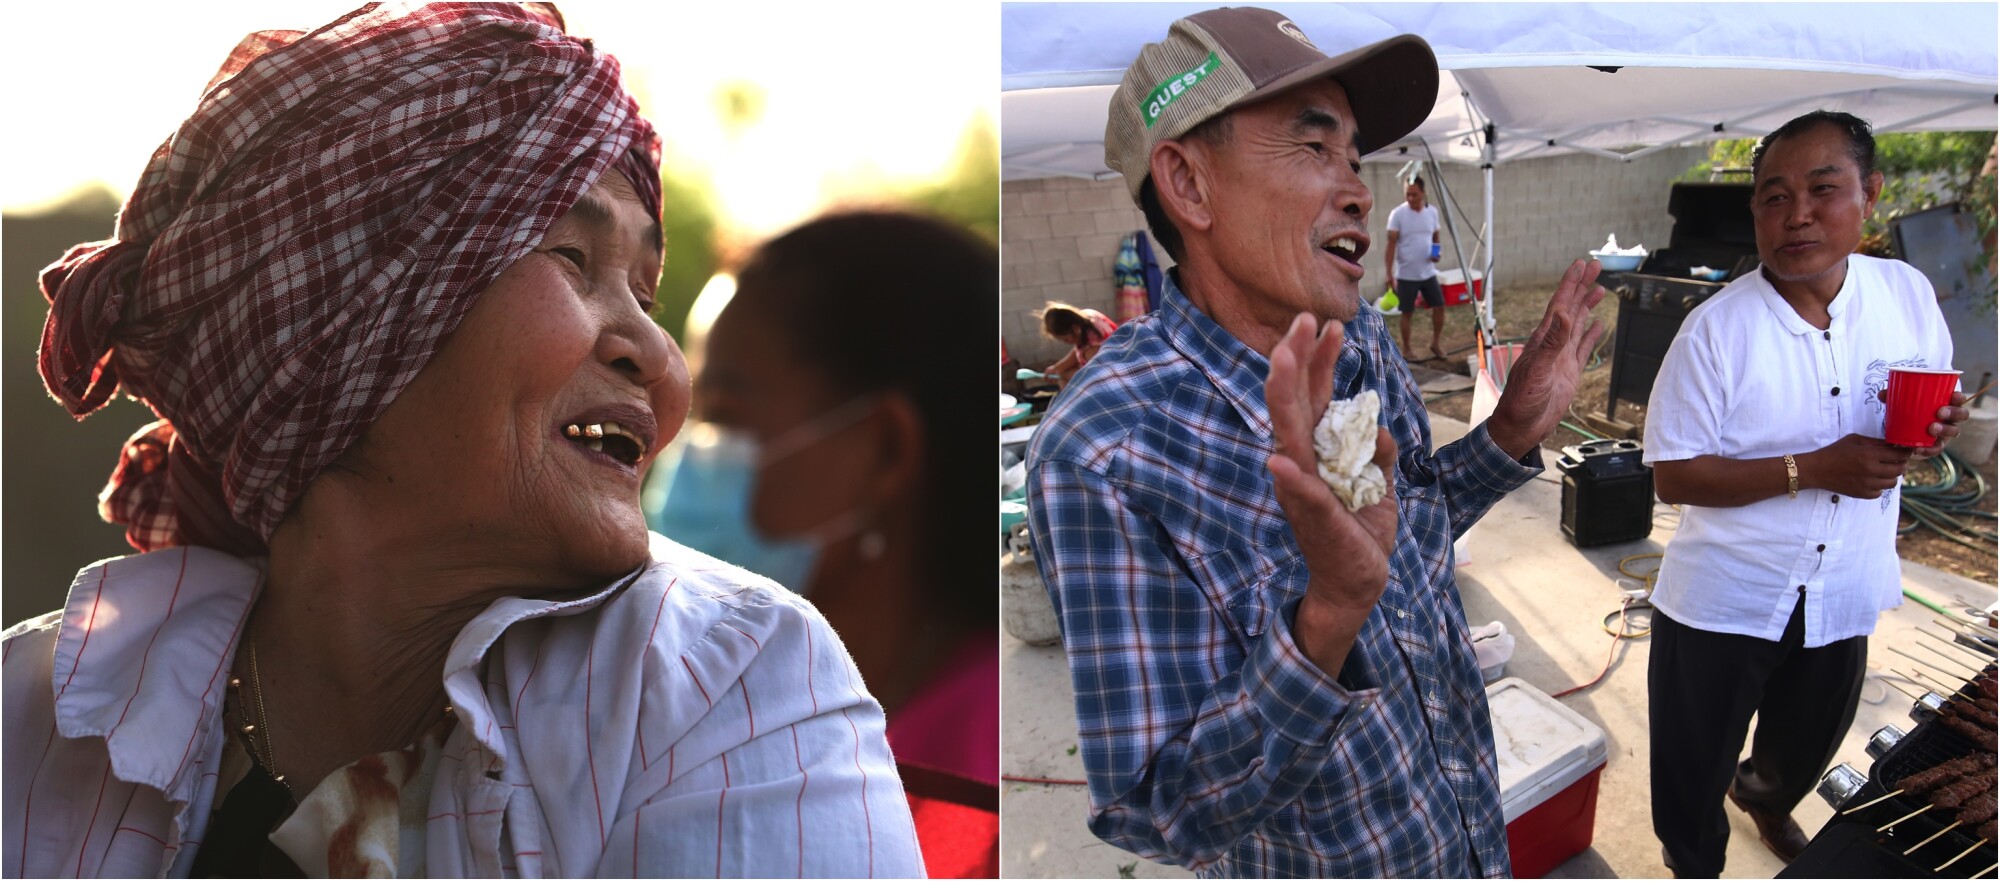 Left, Aorn Liv enjoys the music at the Cambodian Night Market. Right, Khun Van has stories to tell.